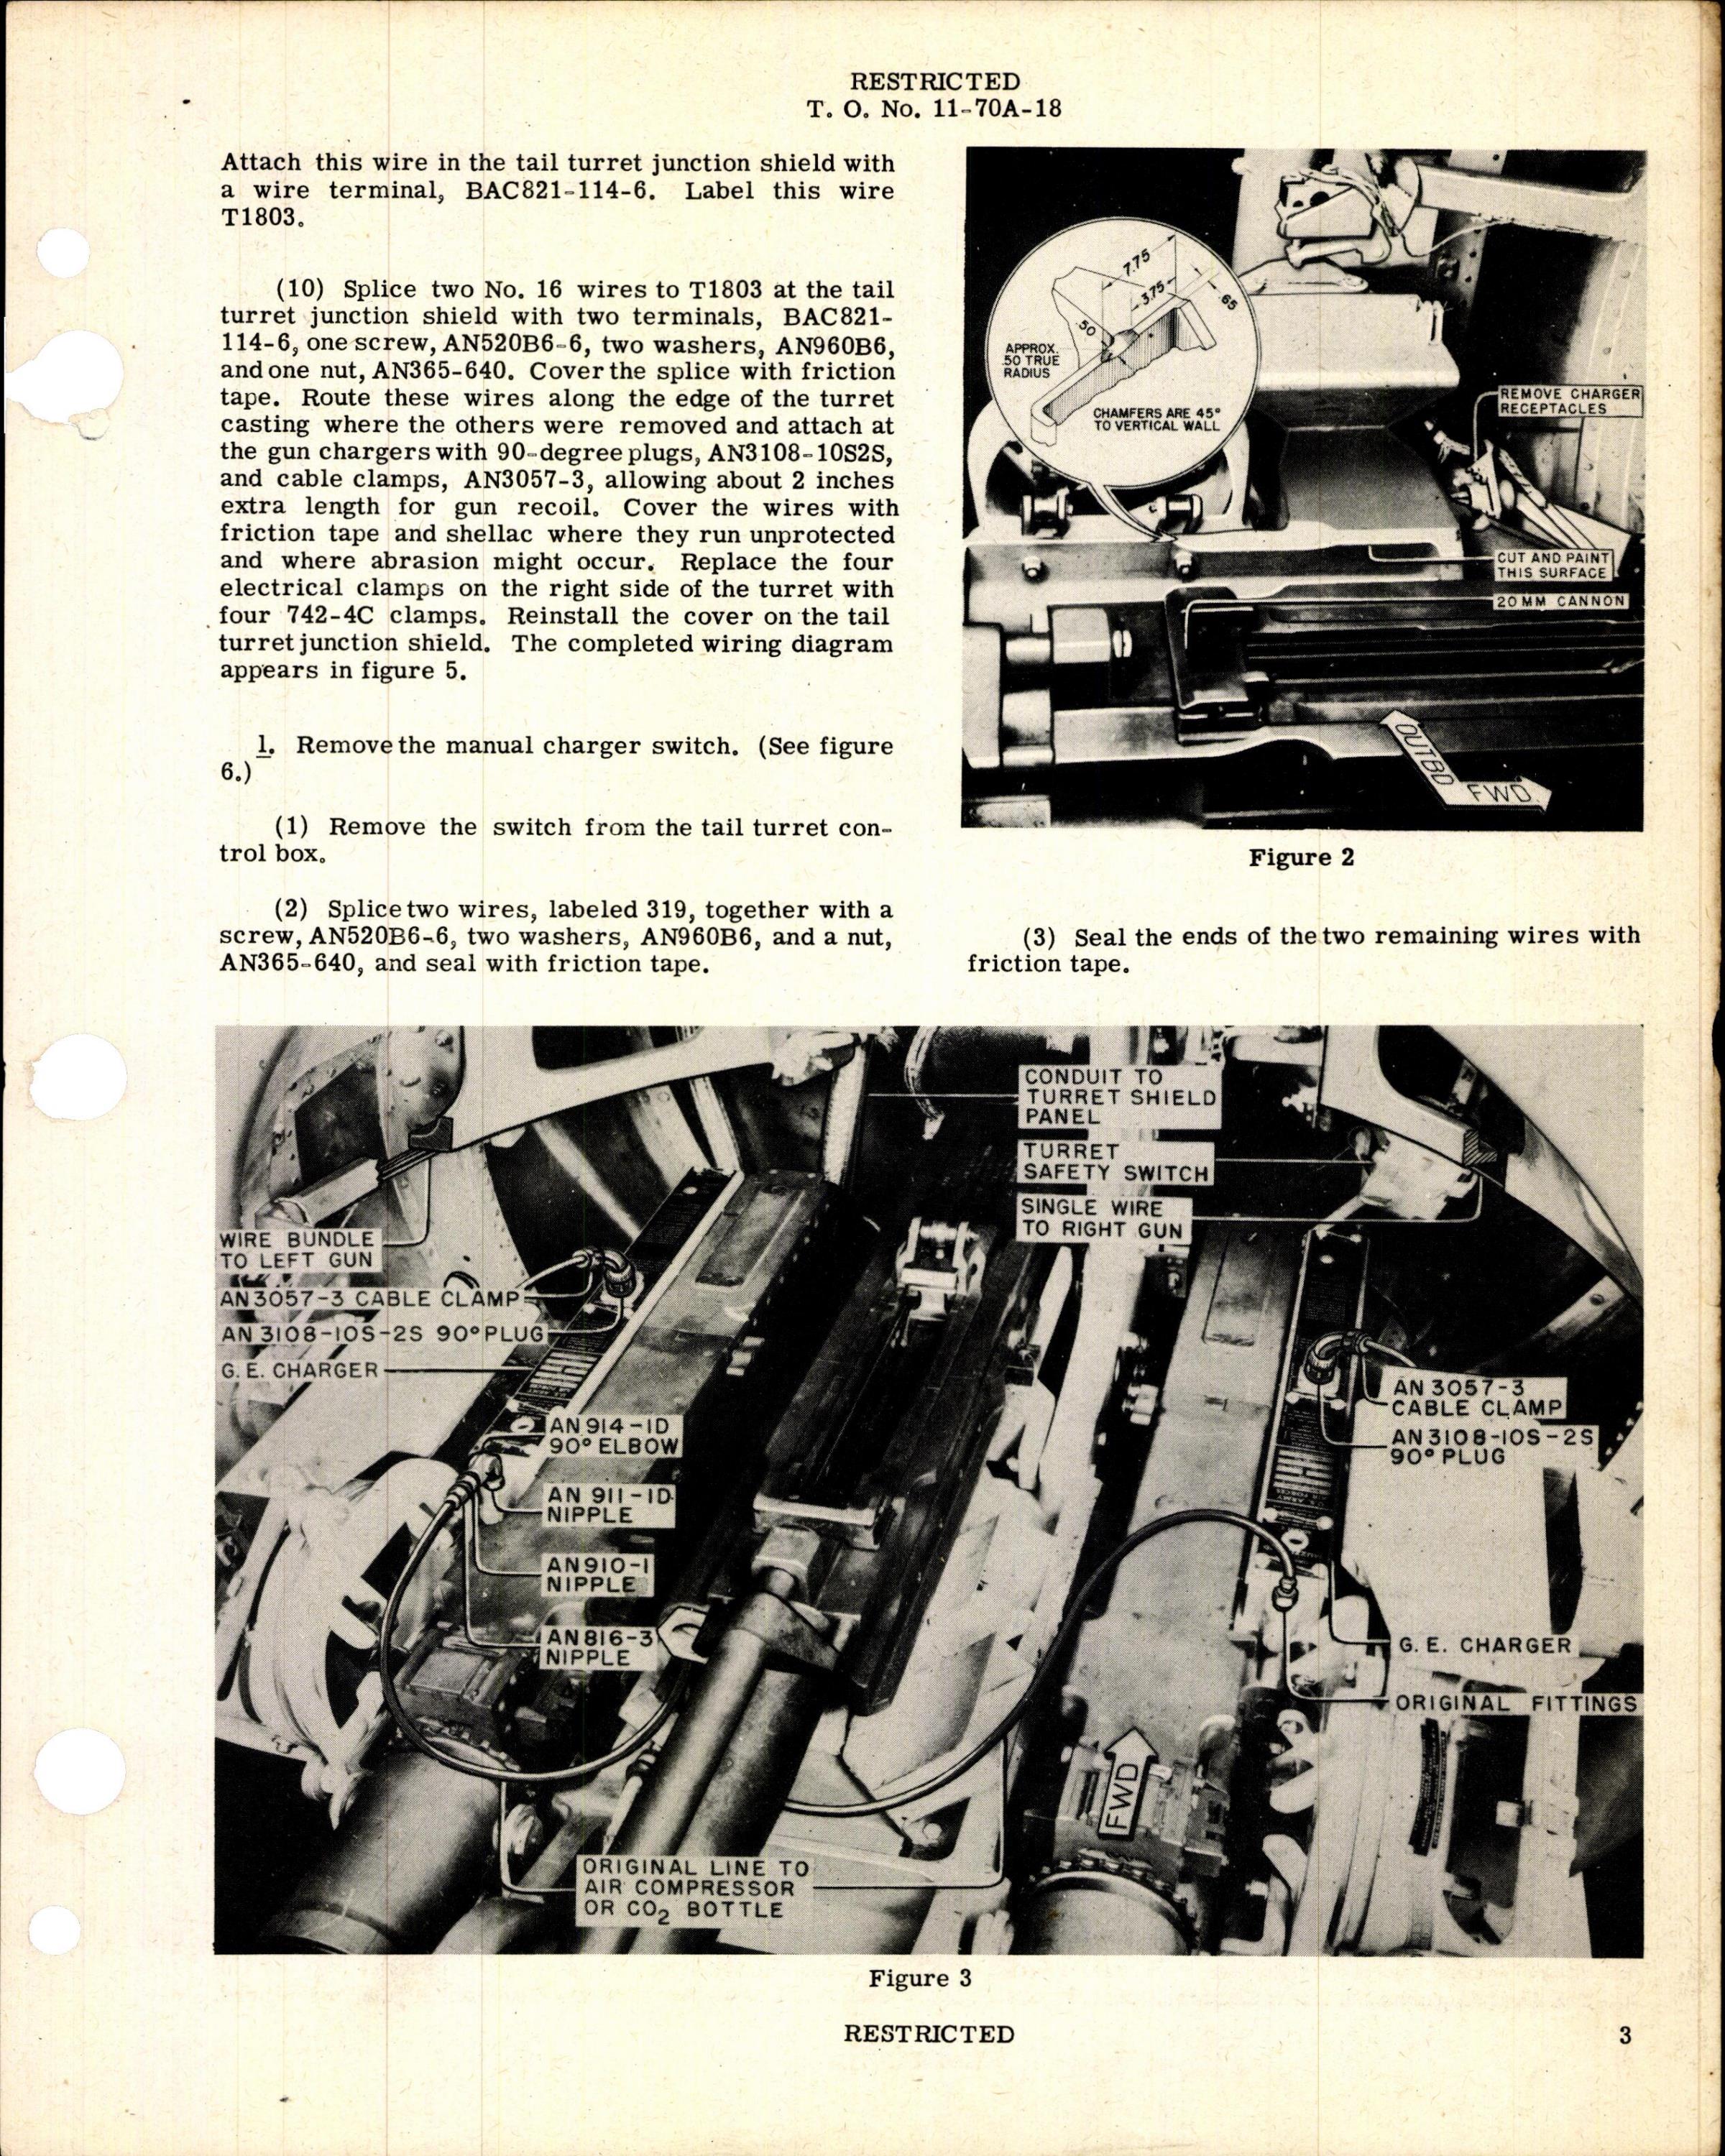 Sample page 3 from AirCorps Library document: Installation of Compressed Air Gun Chargers